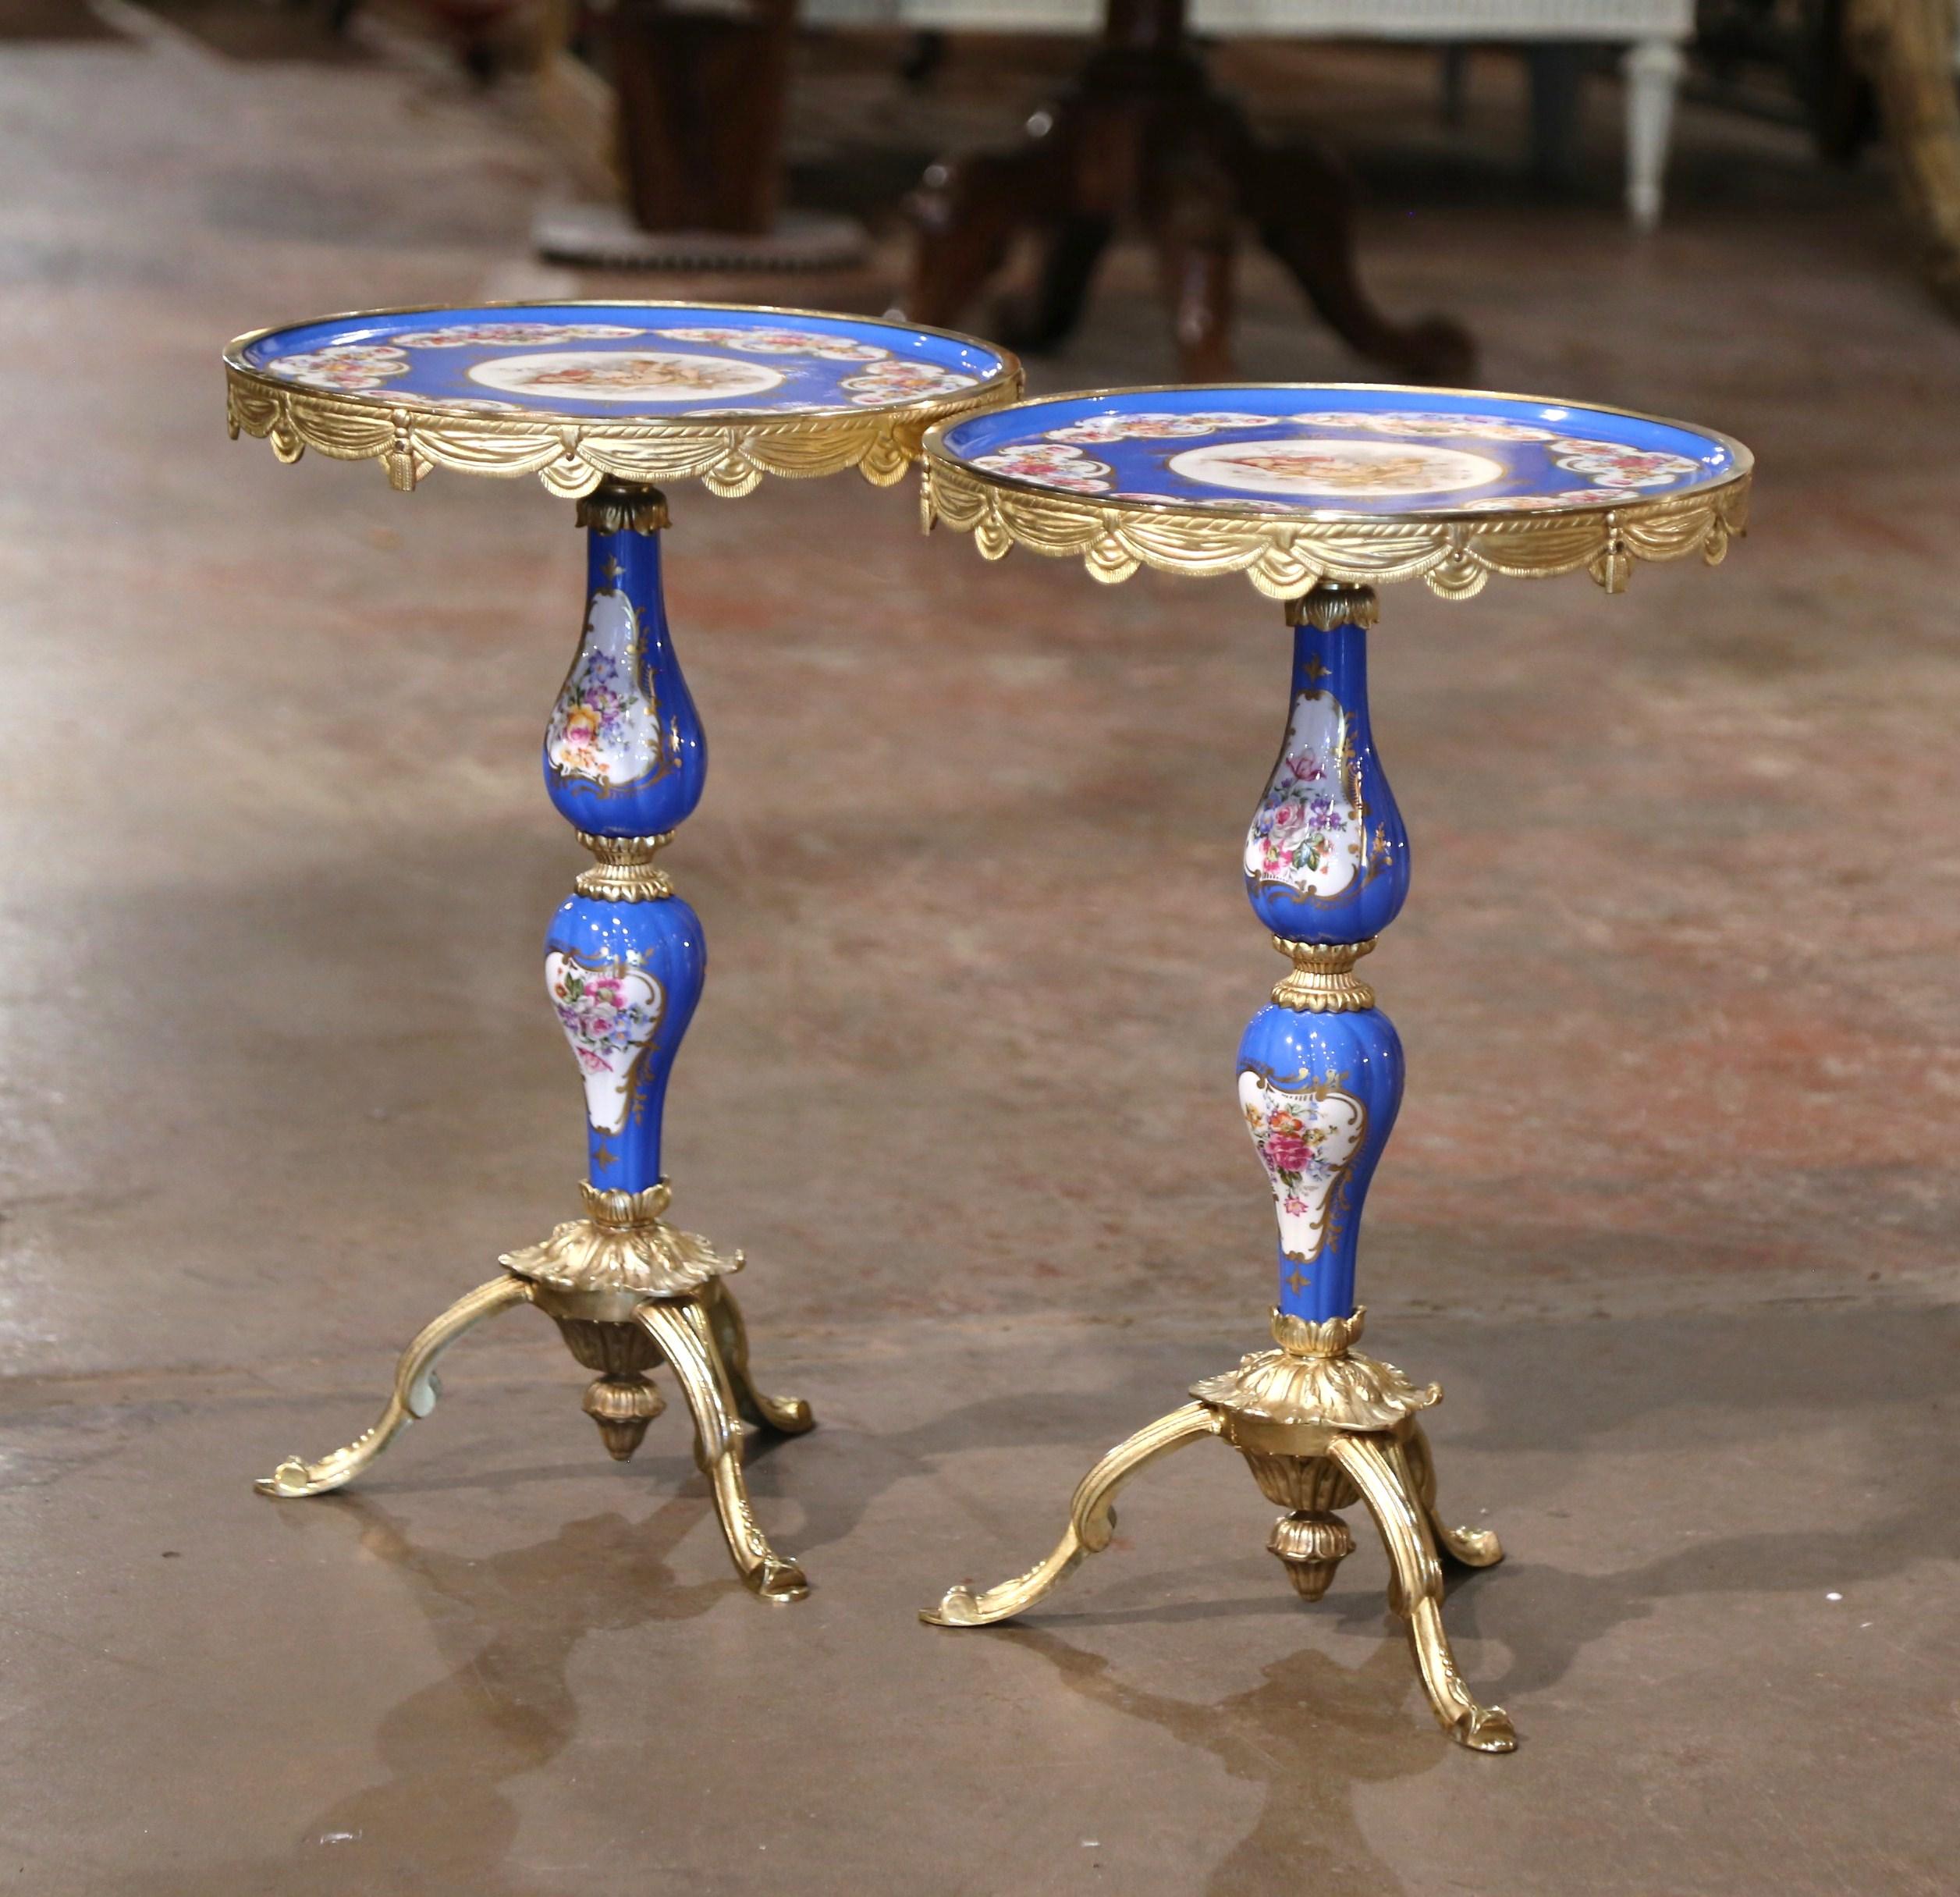 Decorate a living room or a den with this colorful pair of bronze dore and porcelain side tables. Crafted in Paris, France and attributed to the Sevres Manufacture, each small table stands on a bronze tripod base with curved legs ending with scroll